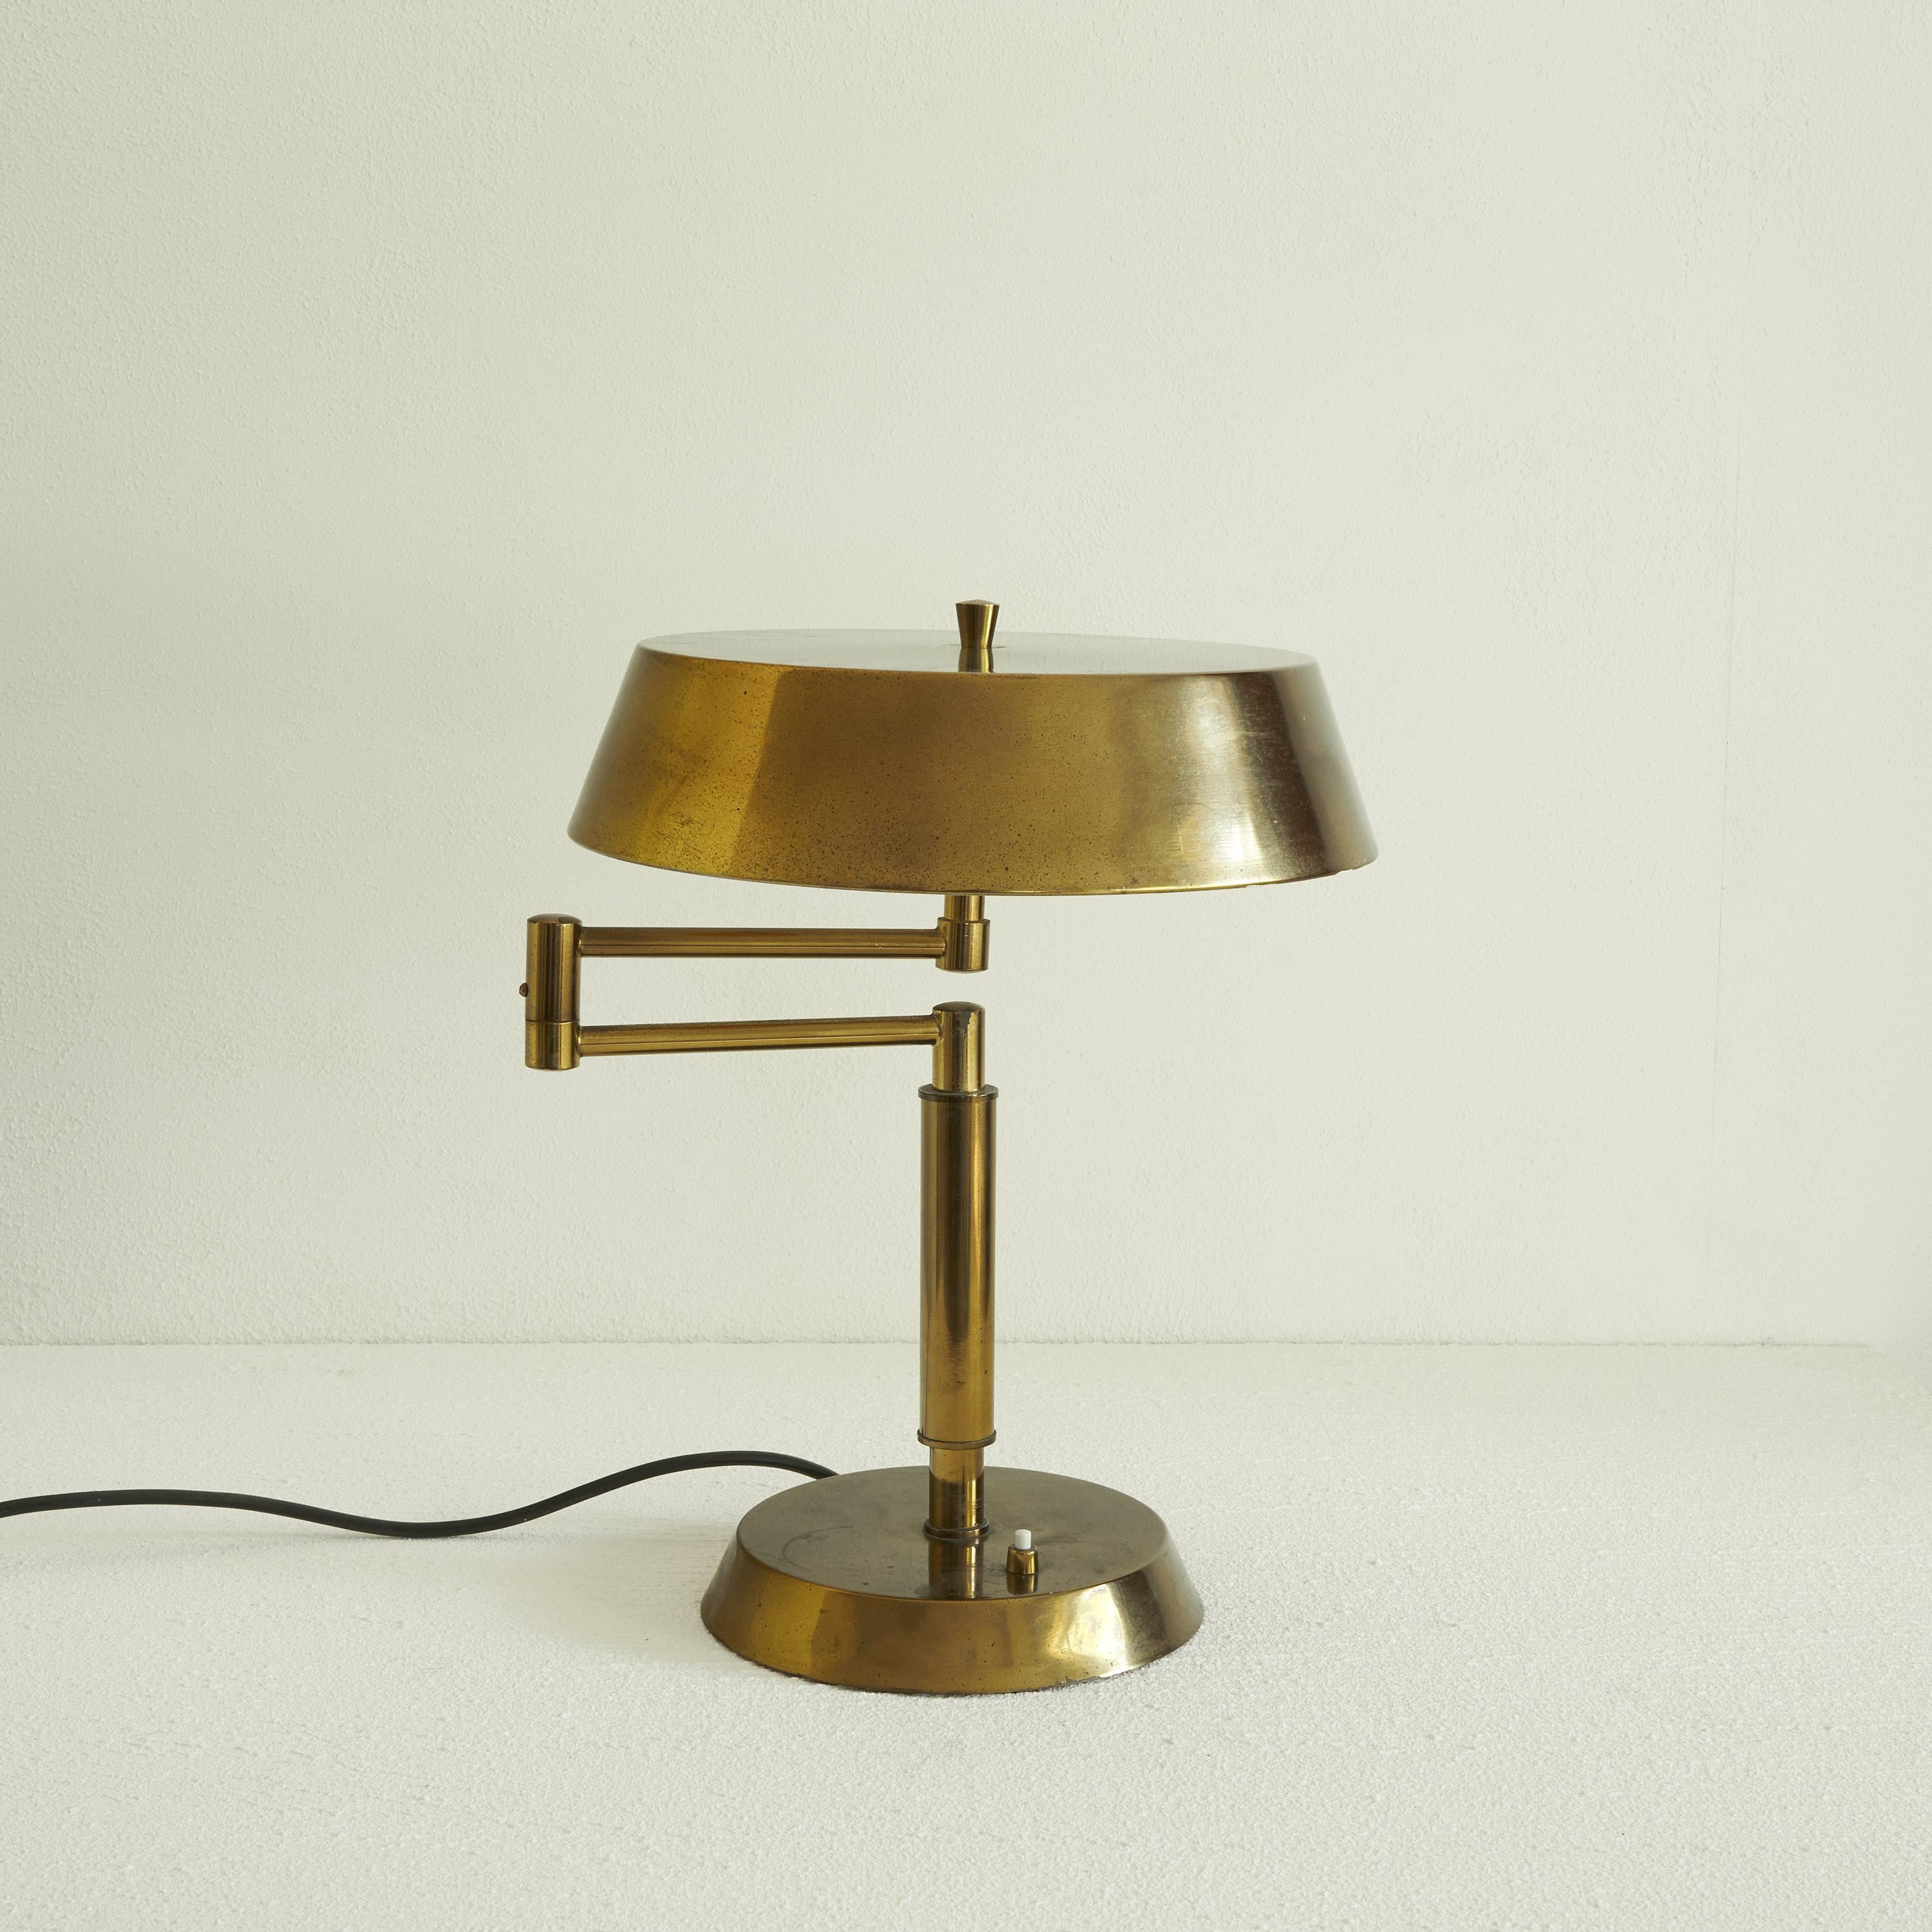 Articulating table lamp in Patinated brass. Most probably Italian, mid 20th century.

Beautiful and elegant articulating heavy brass table or desk lamp with a desirable patination. Great mid-century design and proportions with refined touches like